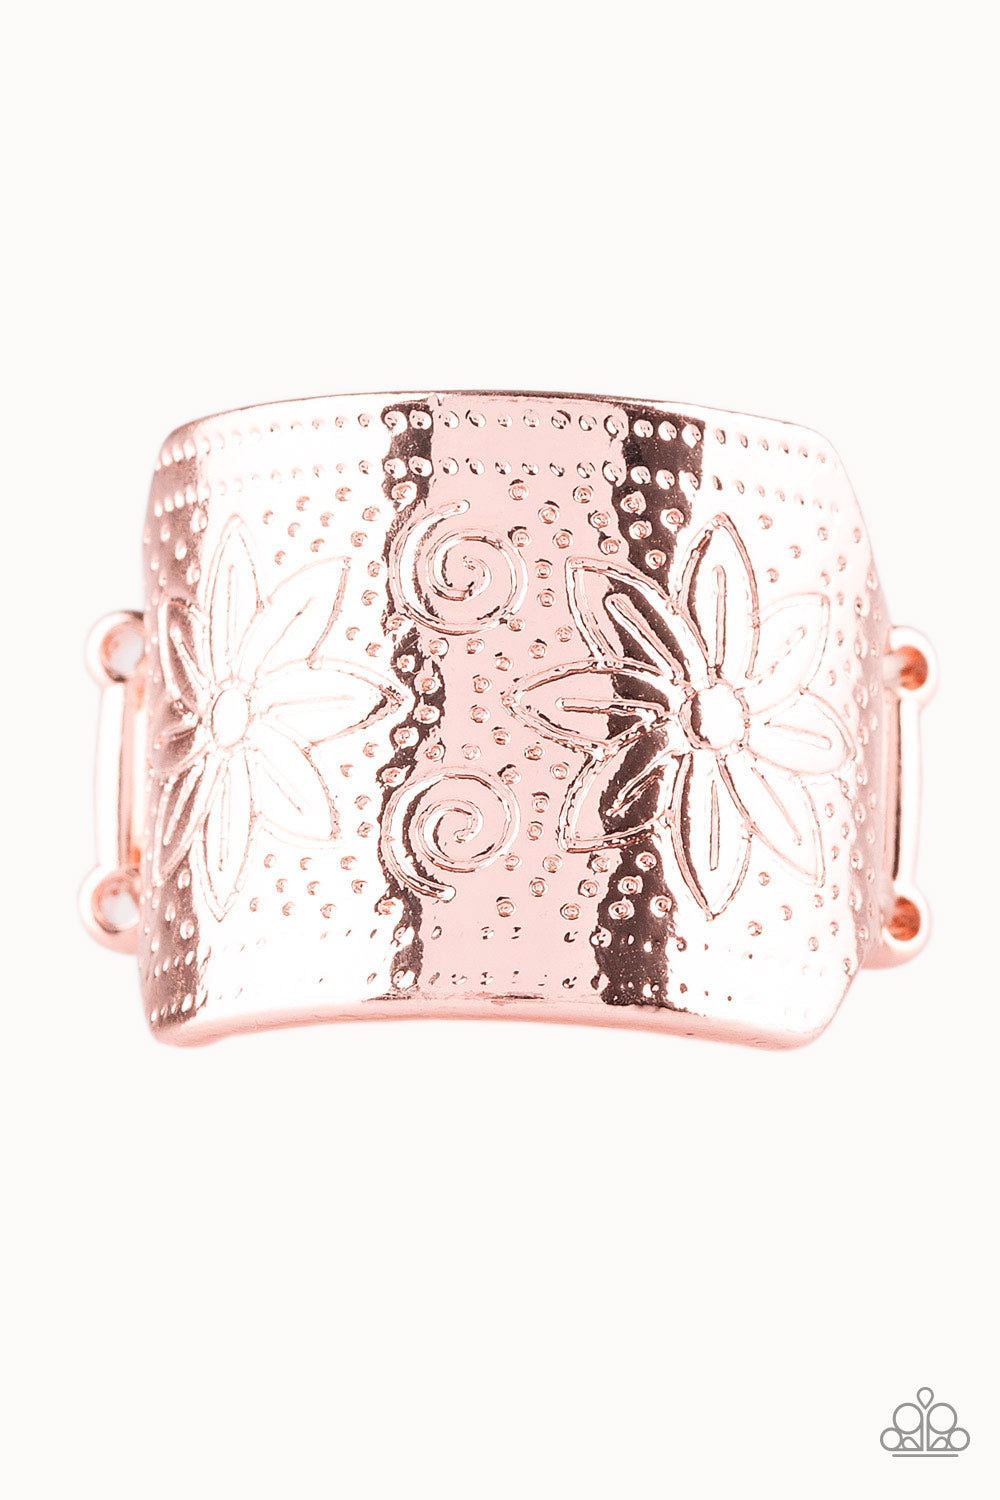 wild-meadows-rose-gold-p4wh-gdrs-071xx